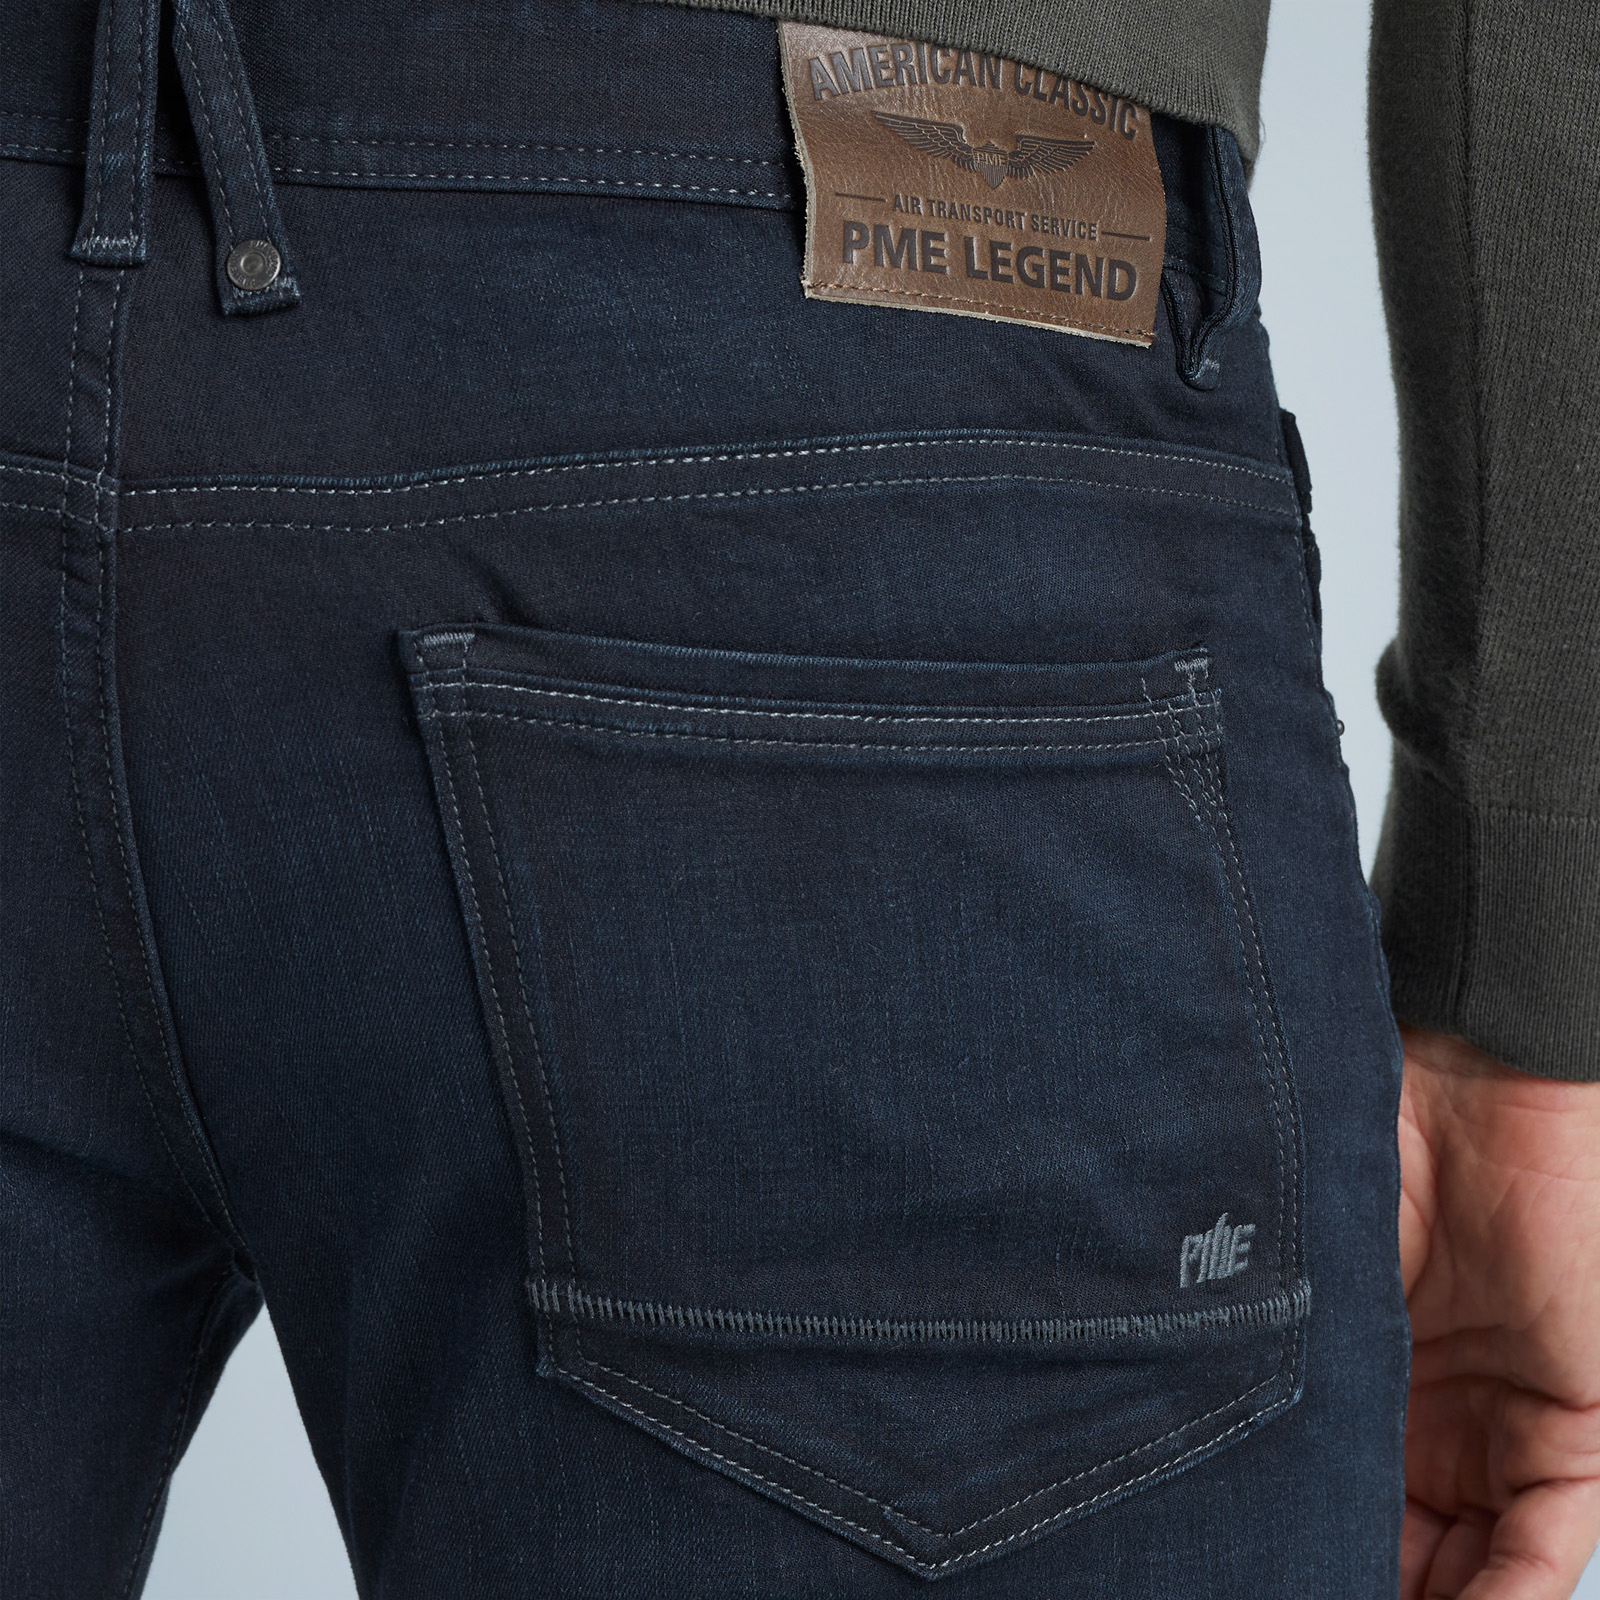 Tailwheel slim | LEGEND | PME shipping fit and returns jeans Free